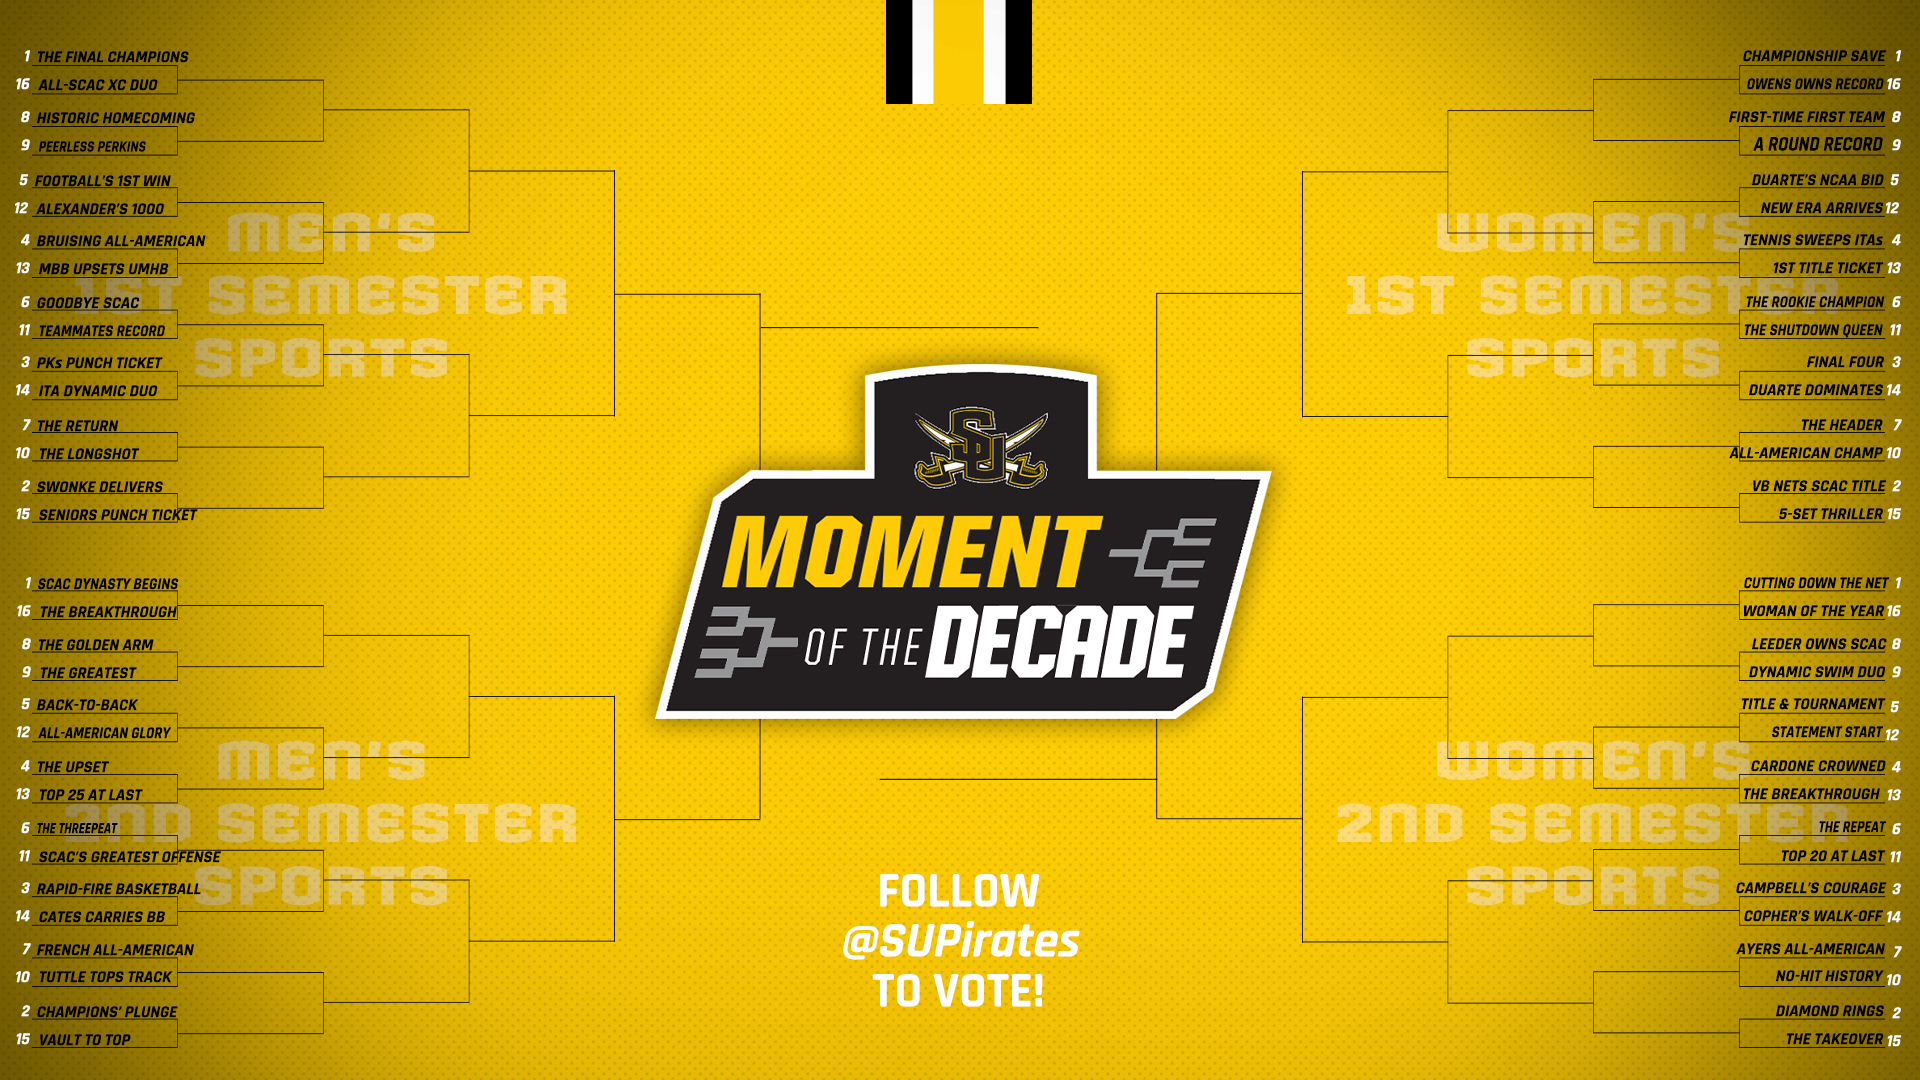 Pirate Madness: The Moment of the Decade Bracket